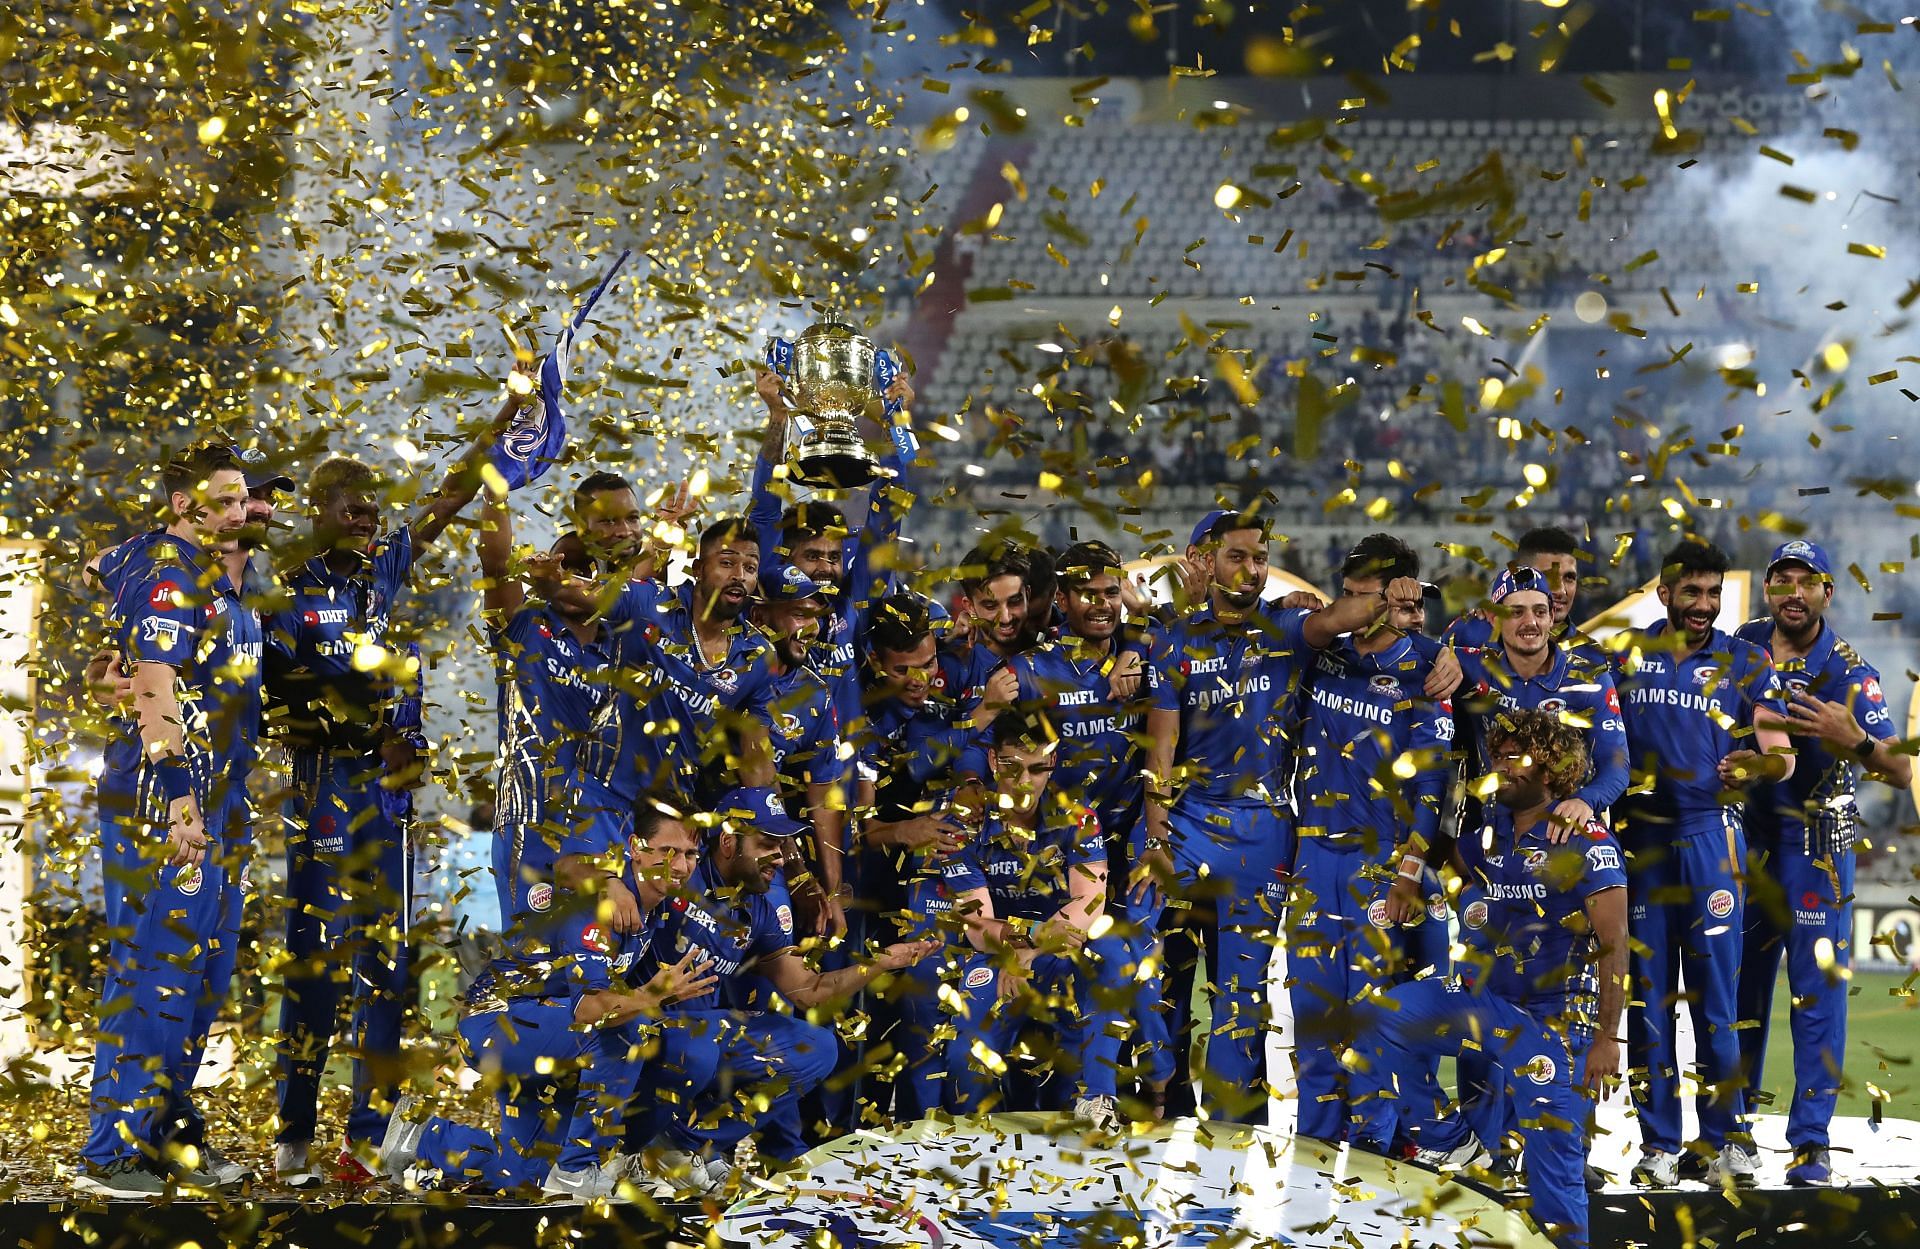 Rohit Sharma has led the Mumbai Indians to five IPL titles, the most for any skipper and any team.